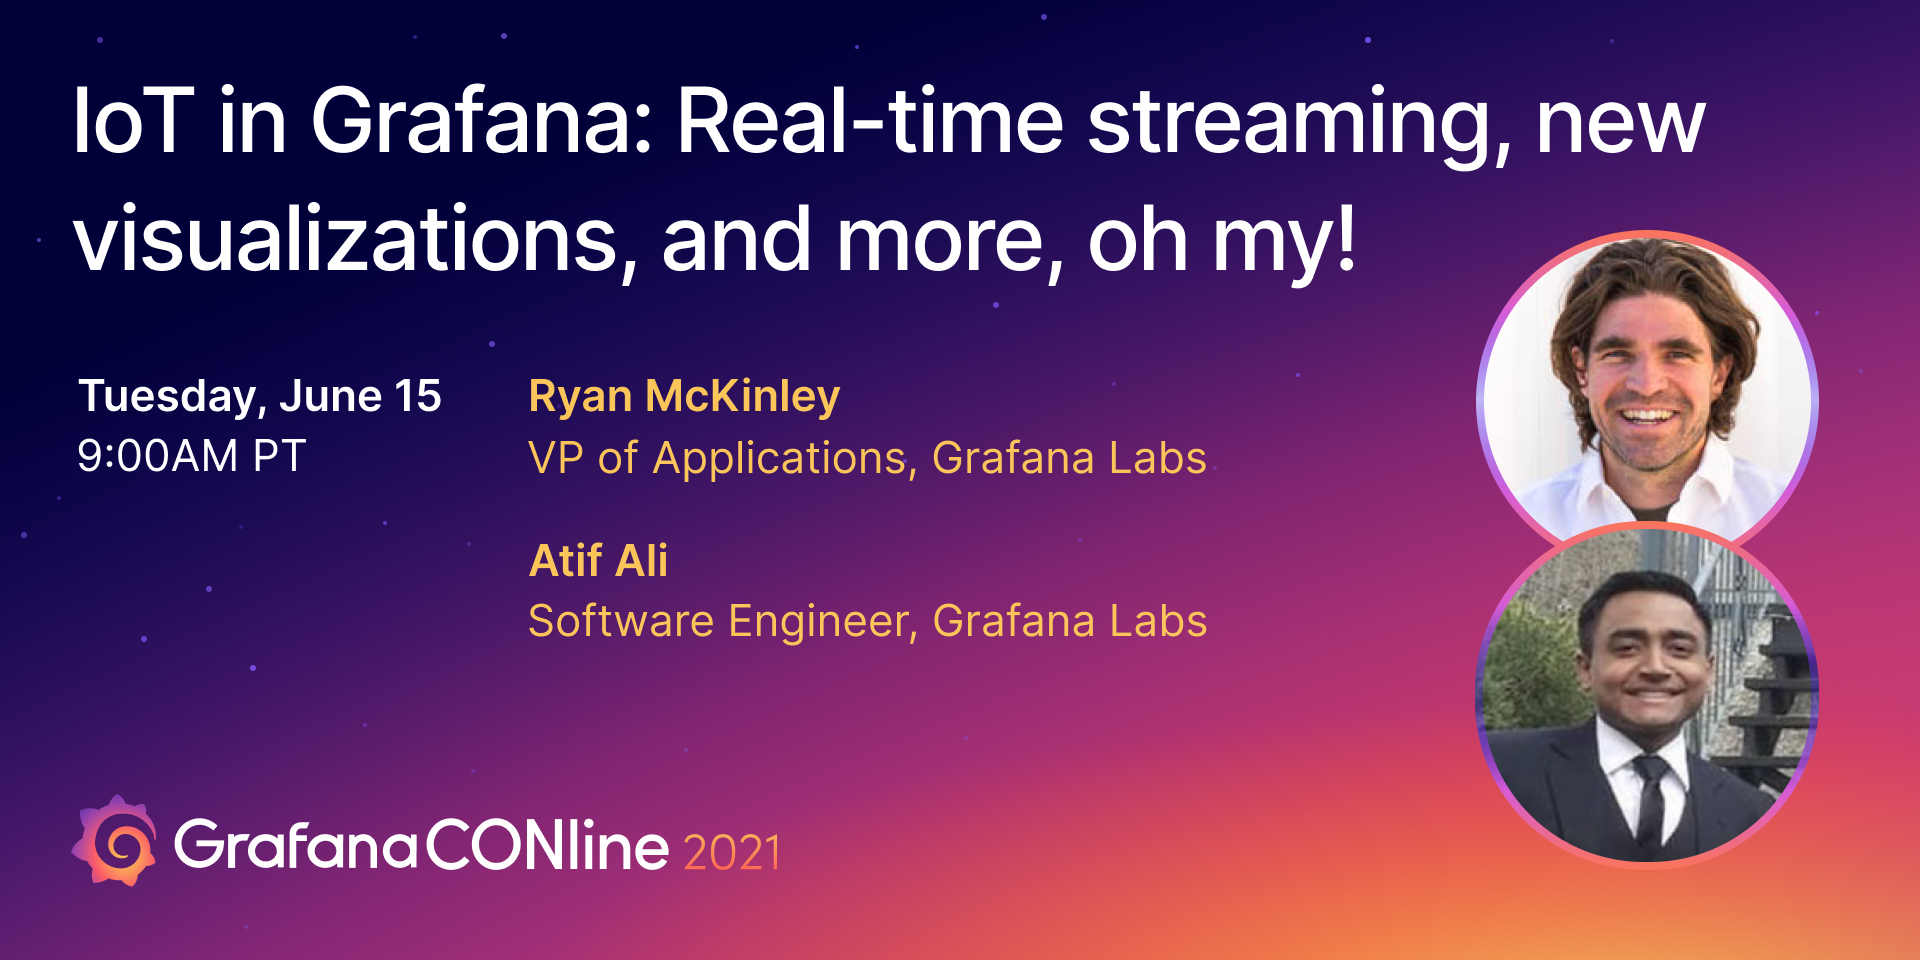 IoT in Grafana: Real-time streaming, new visualizations, and more, oh my!